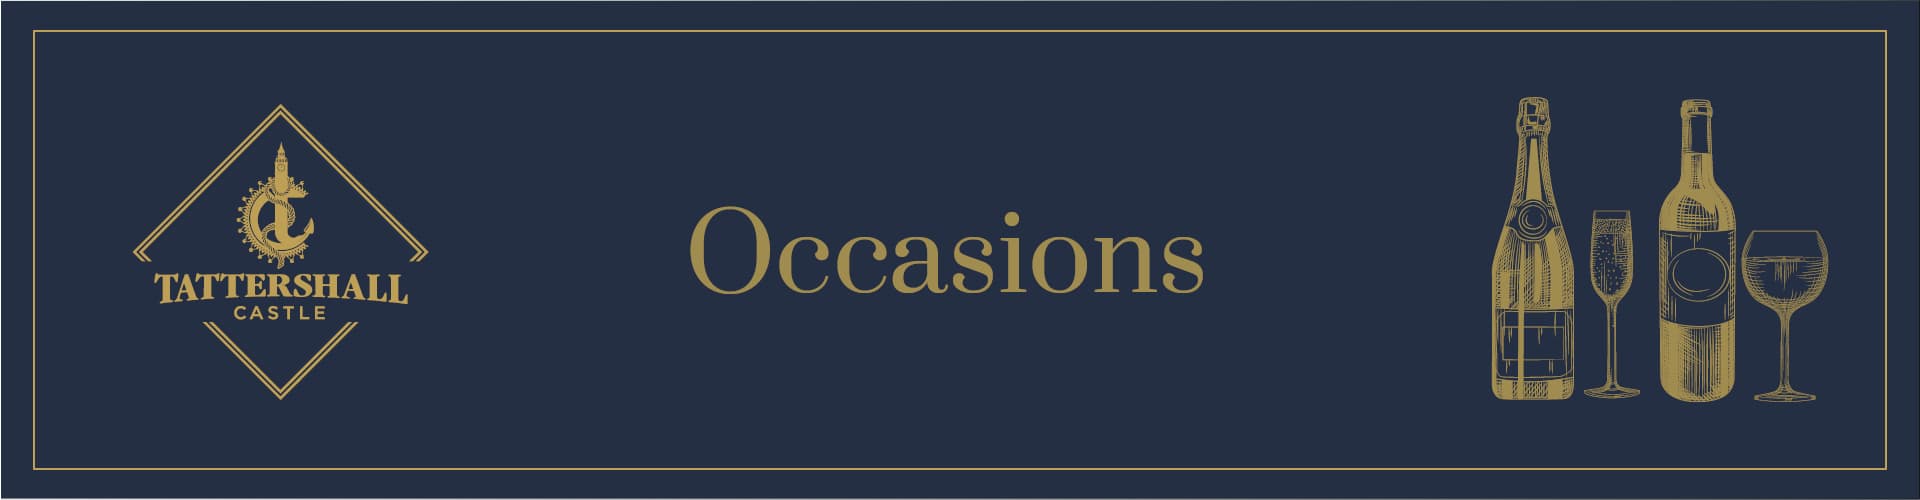 Occasions at The Tattershall Castle